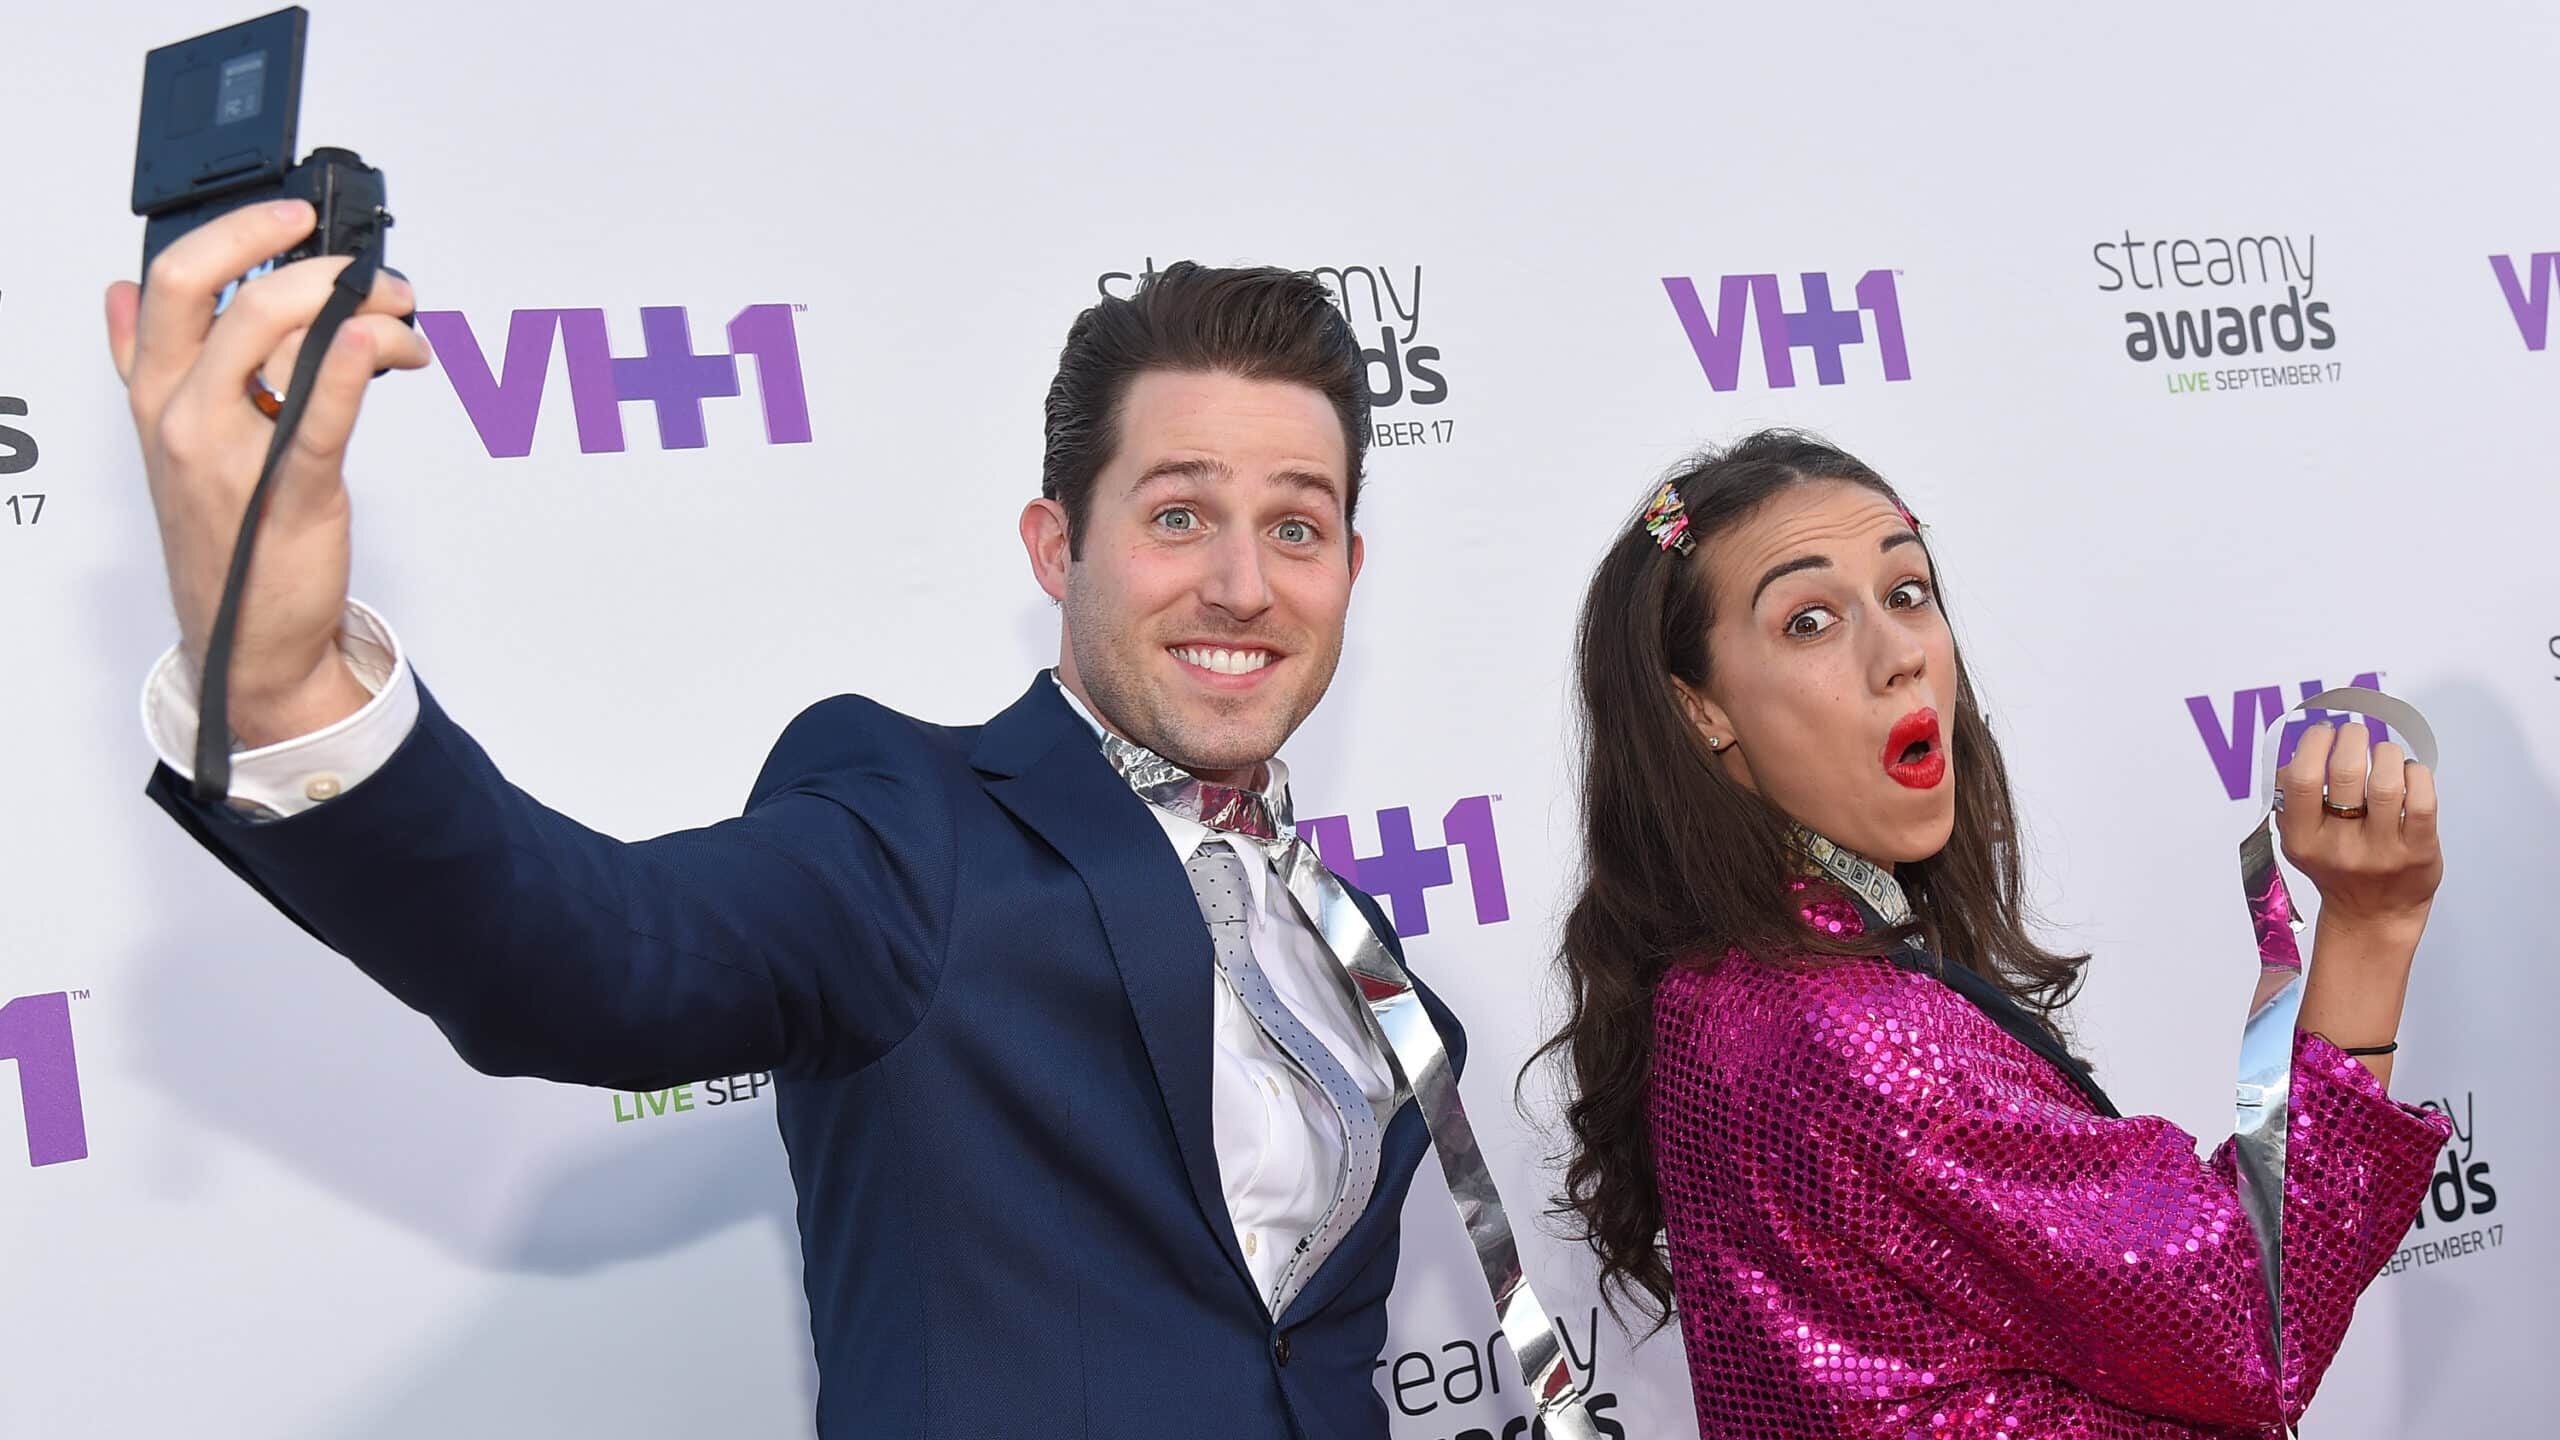 LOS ANGELES, CA - SEPTEMBER 17: Internet personalities Joshua David Evans (L) and Colleen Ballinger, aka Miranda Sings attends VH1's 5th Annual Streamy Awards at the Hollywood Palladium on Thursday, September 17, 2015 in Los Angeles, California.